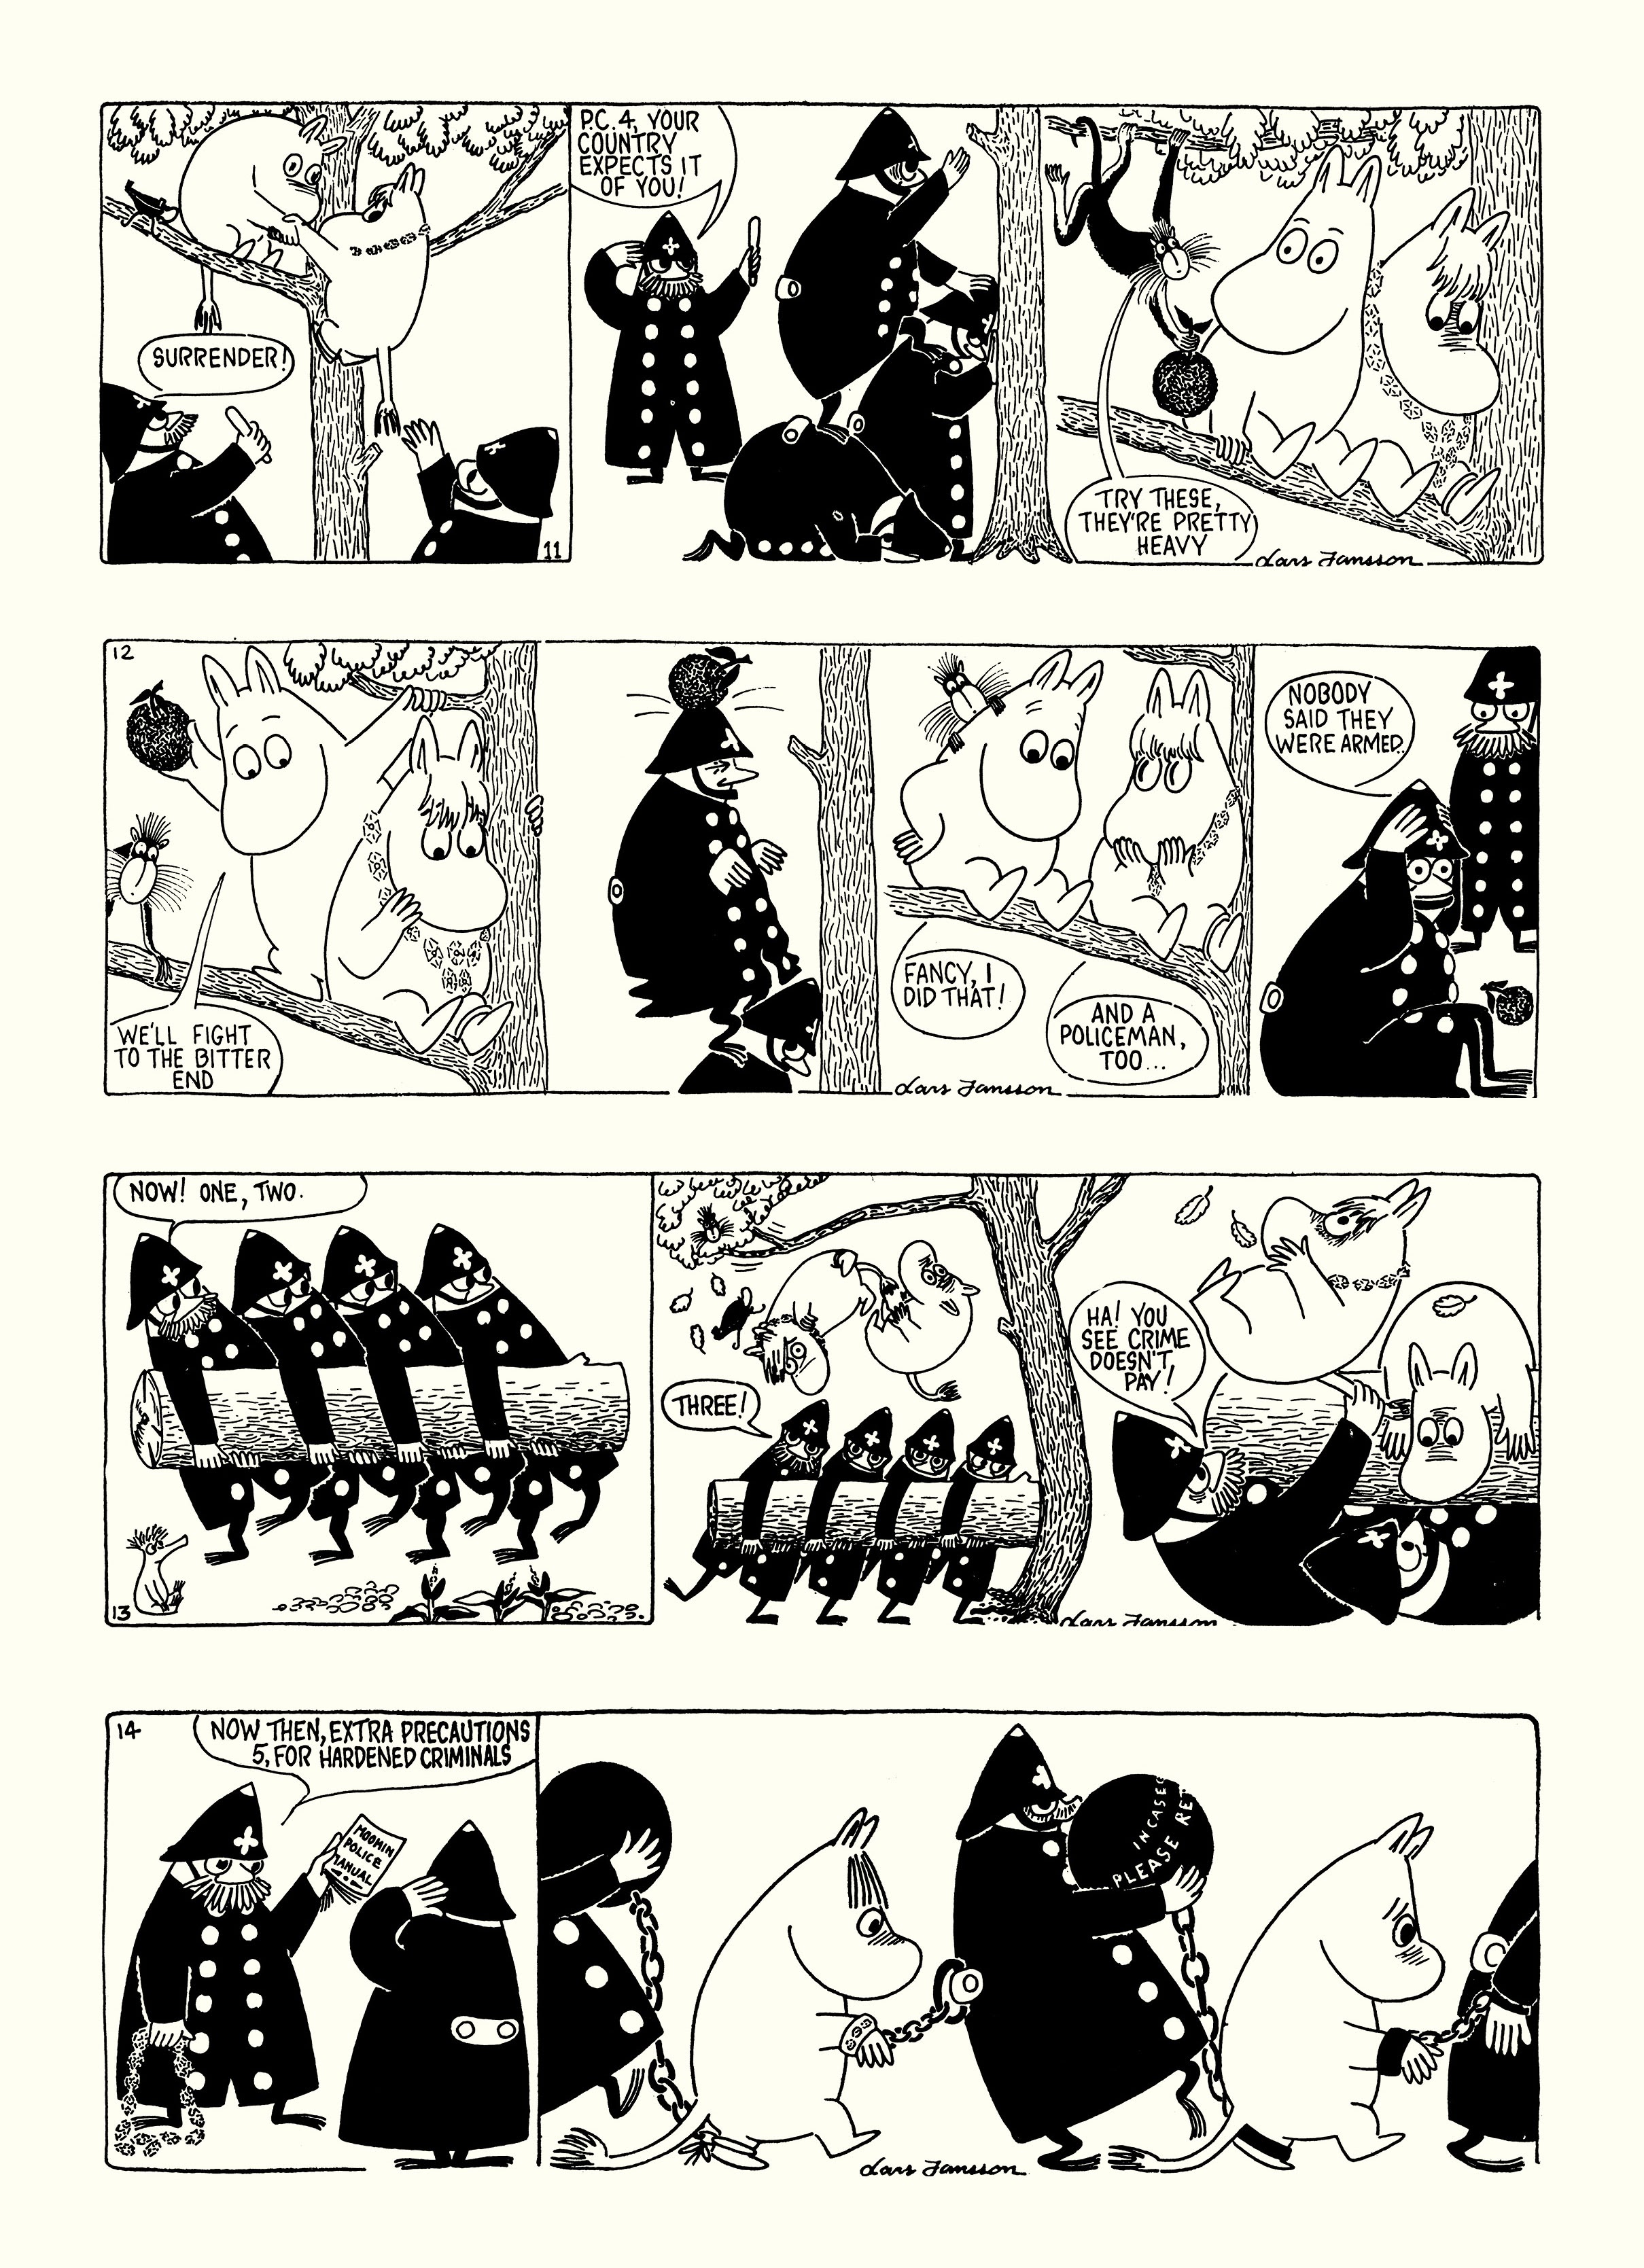 Read online Moomin: The Complete Lars Jansson Comic Strip comic -  Issue # TPB 6 - 9